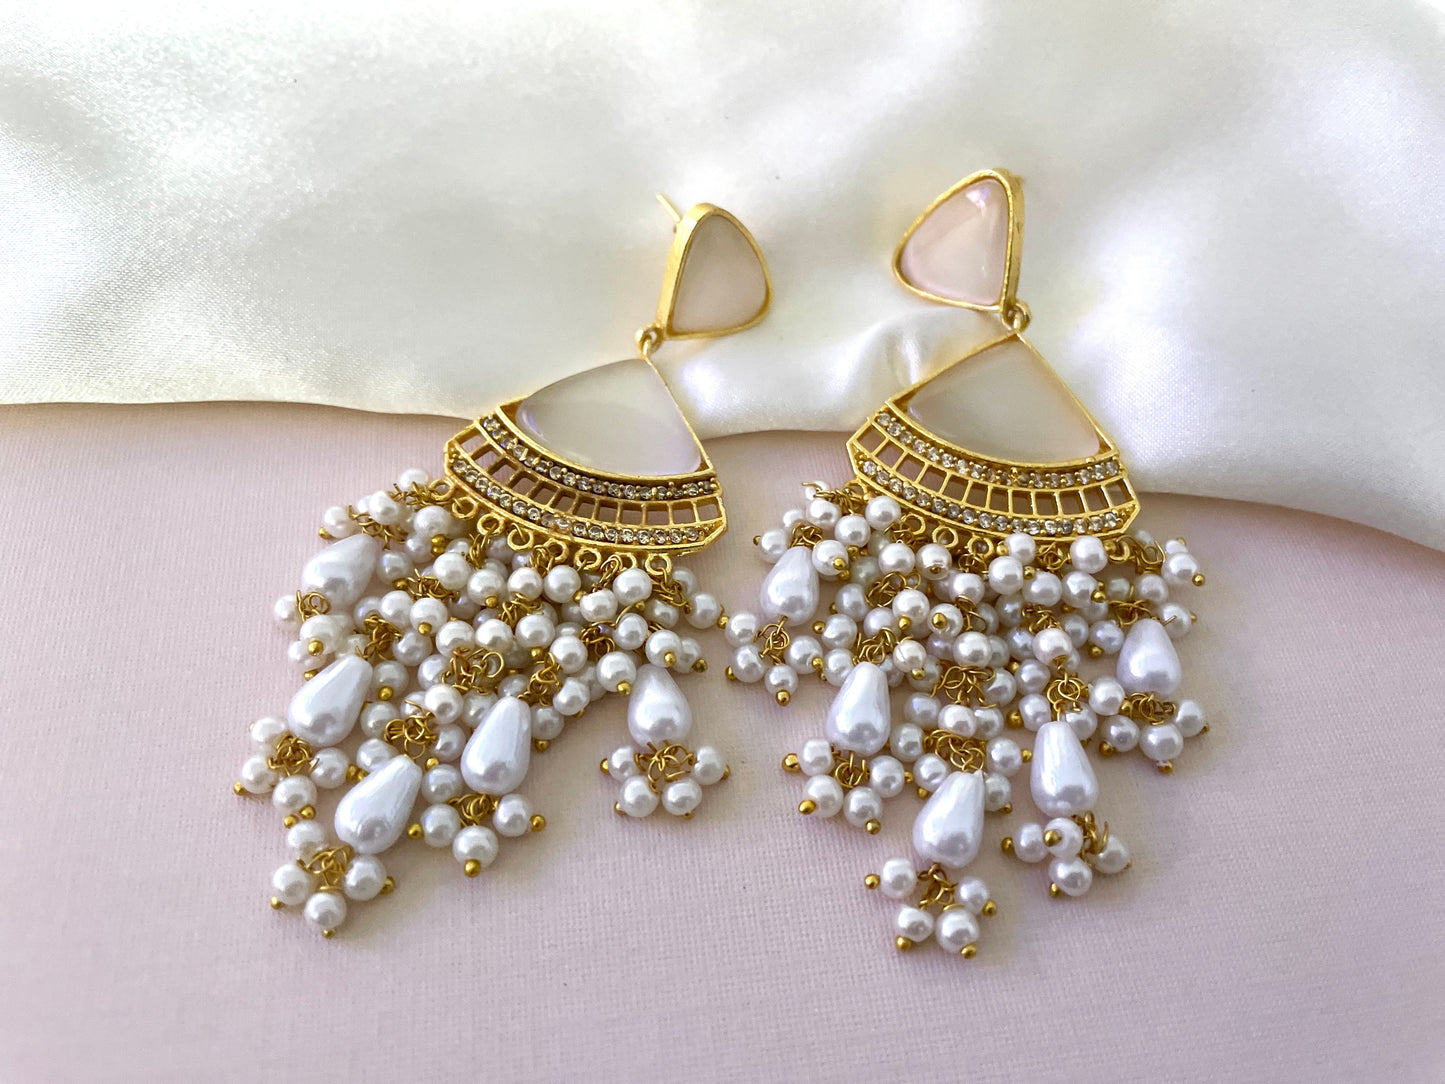 Gold and White Stylish Drop Earring Pair